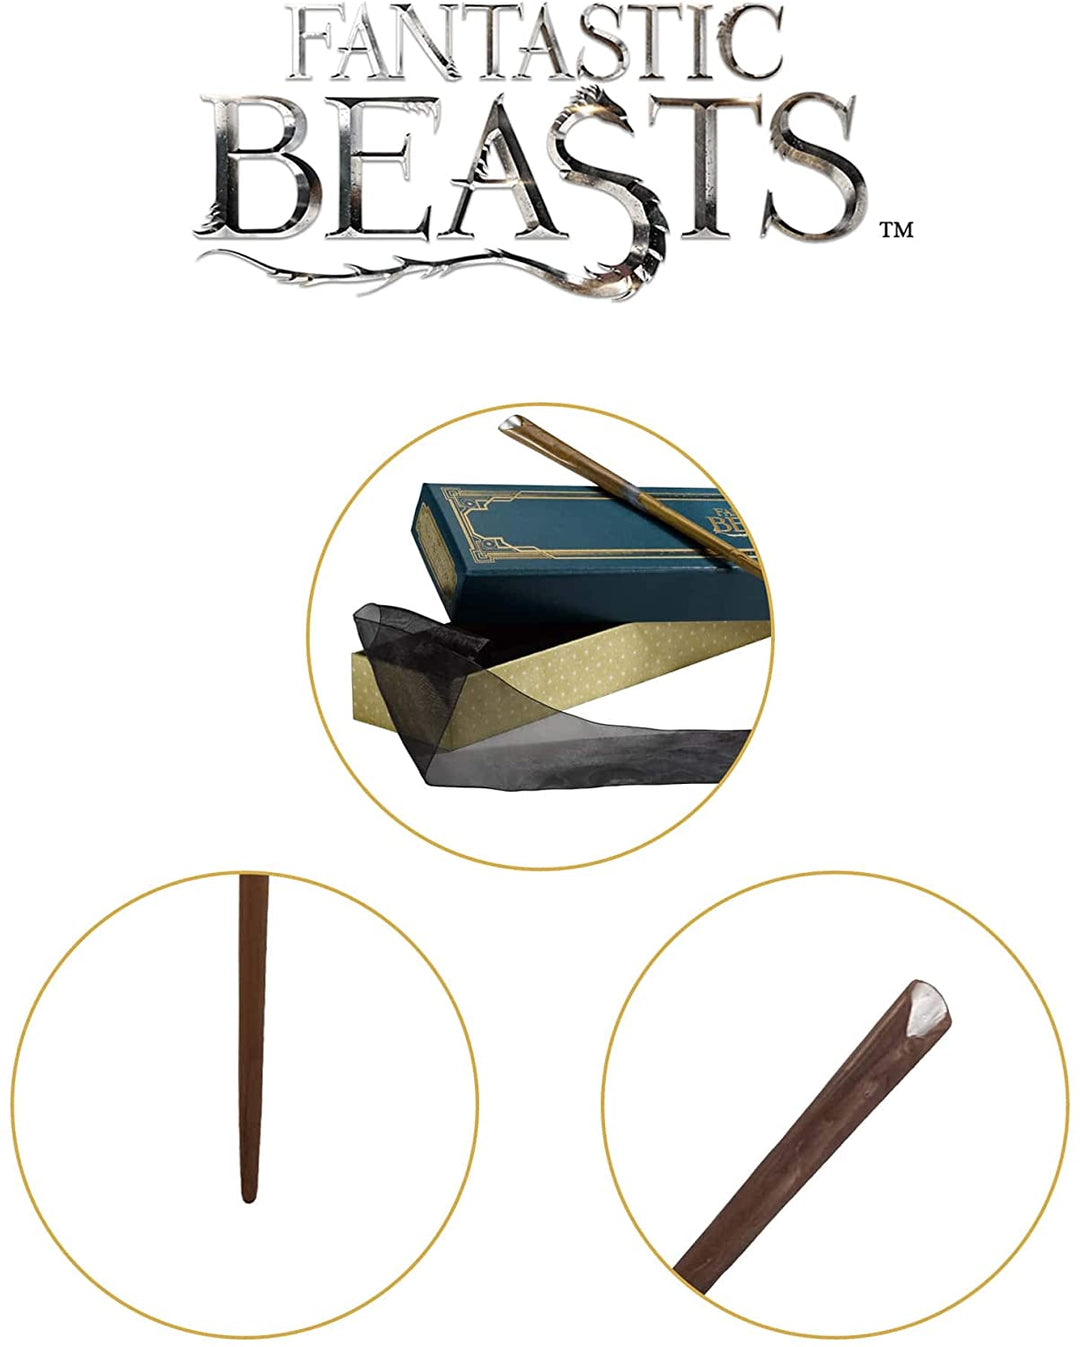 The Noble Collection The Wand of Newt Scamander mit Collectors Box